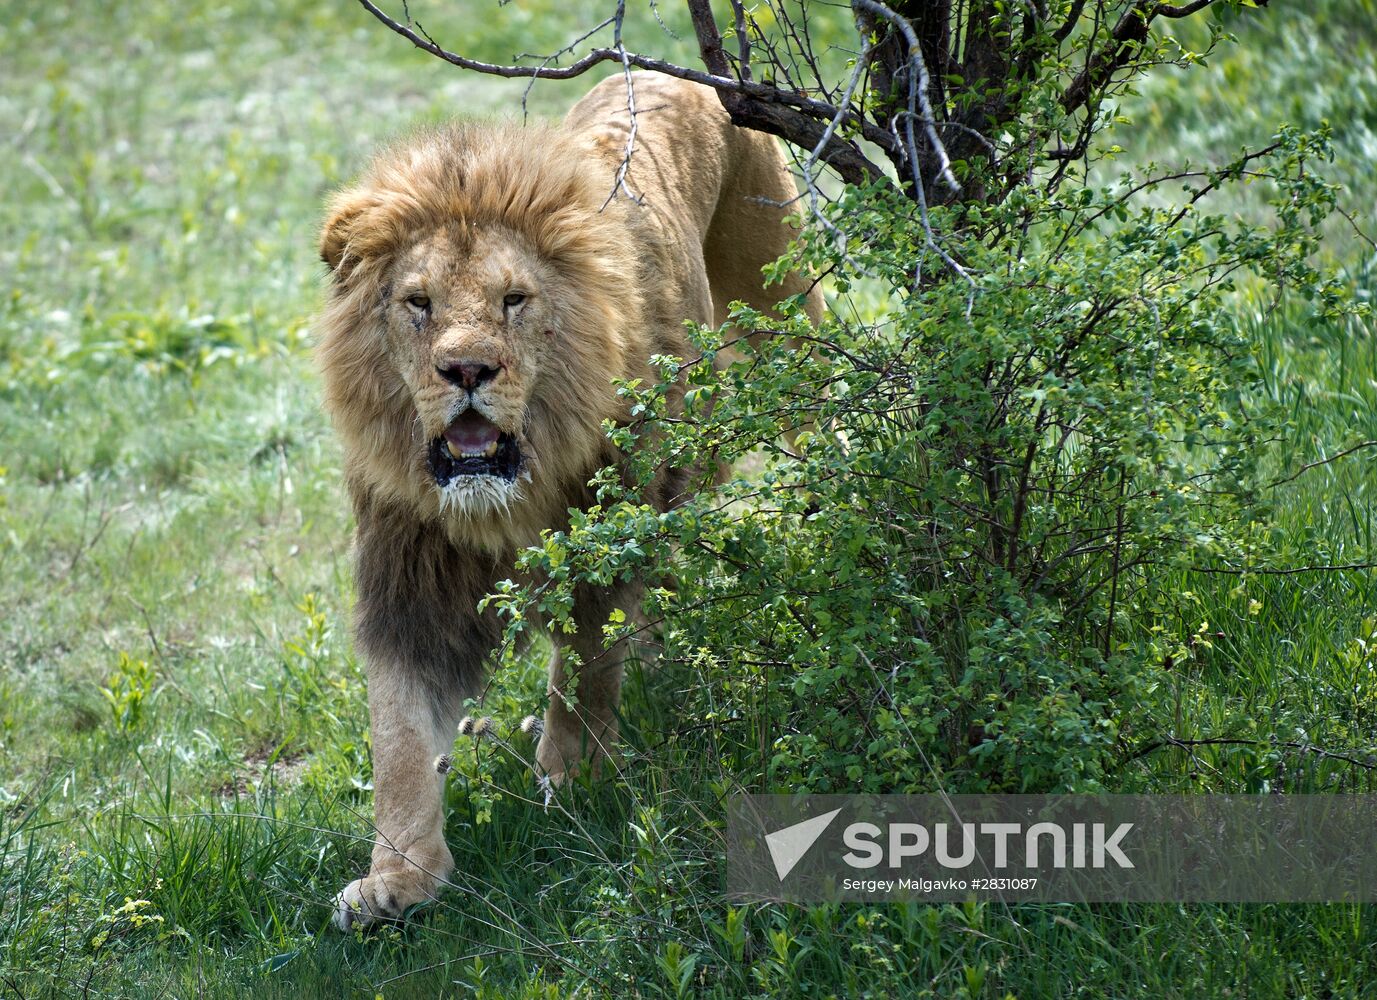 Lions released from winter cages in Taigan Safari Park, Crimea